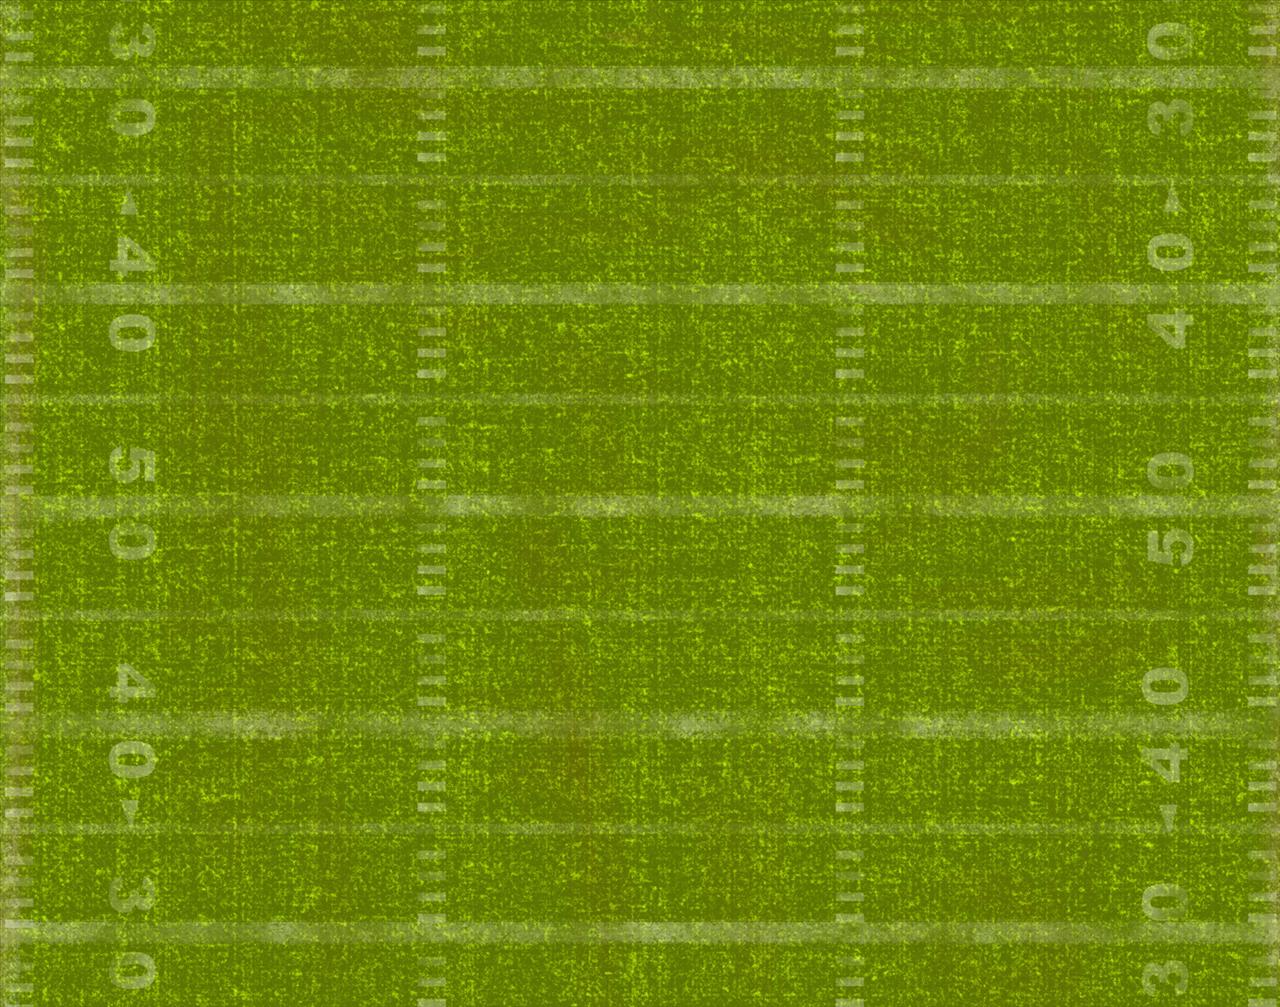 Football Field - Grungy Athlete free powerpoint background